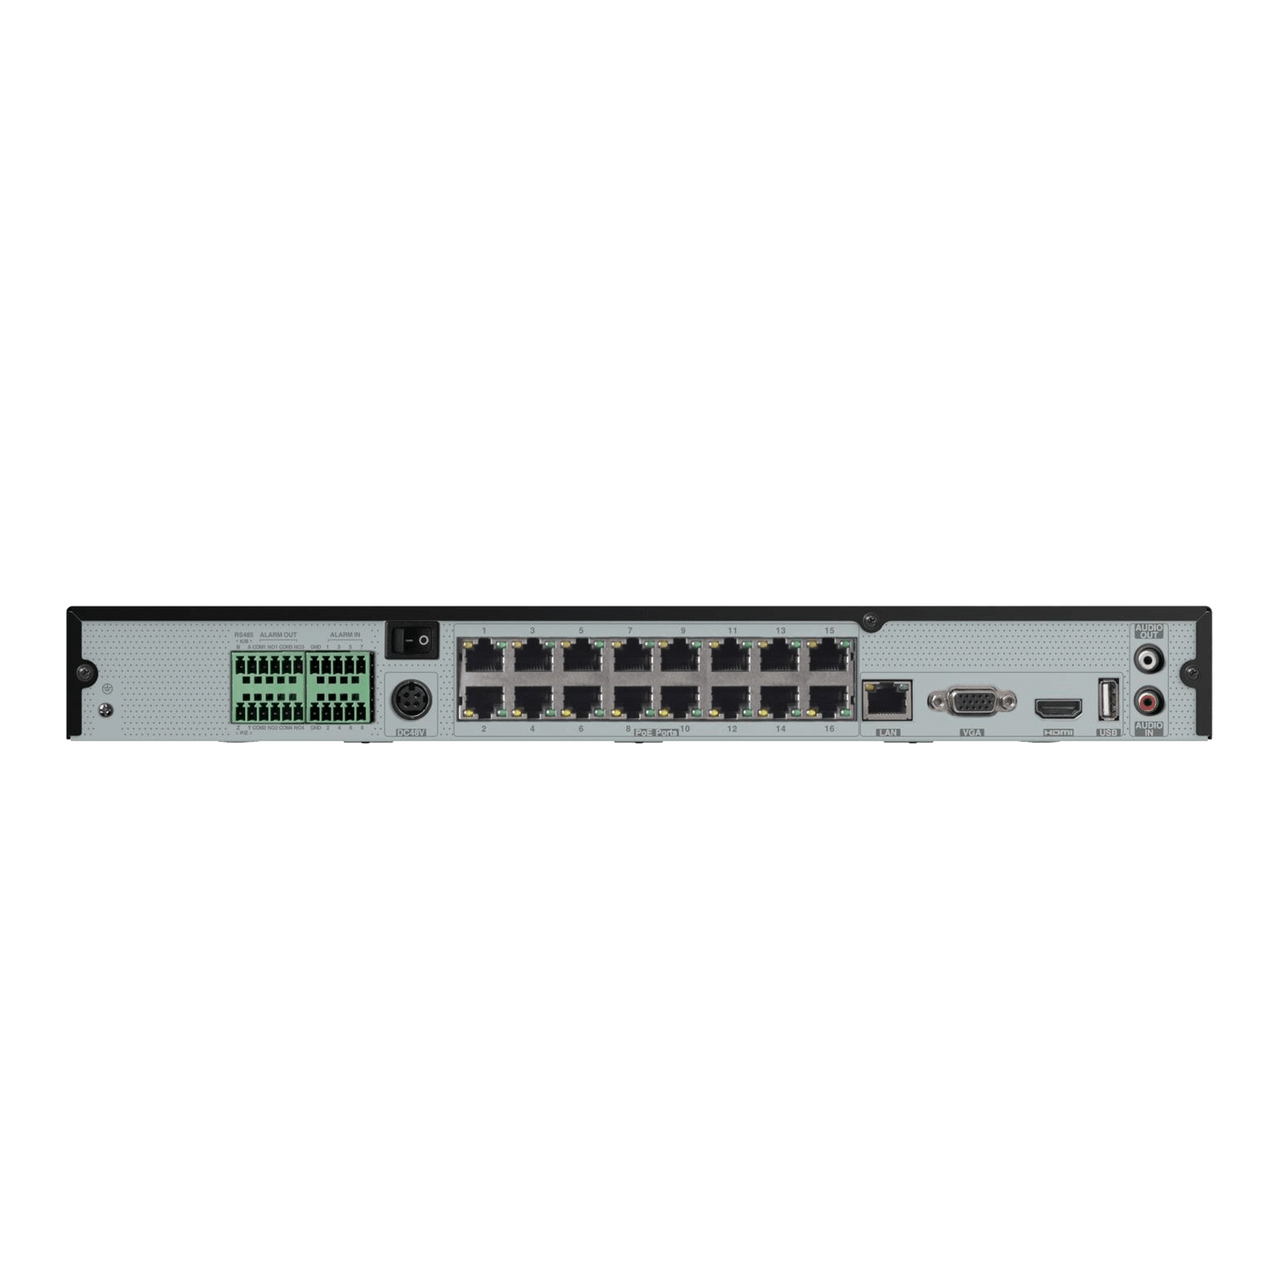 Speco Technologies N16NRE12TB 16 Channel Facial Recognition Recorder with Smart Analytics- 12TB